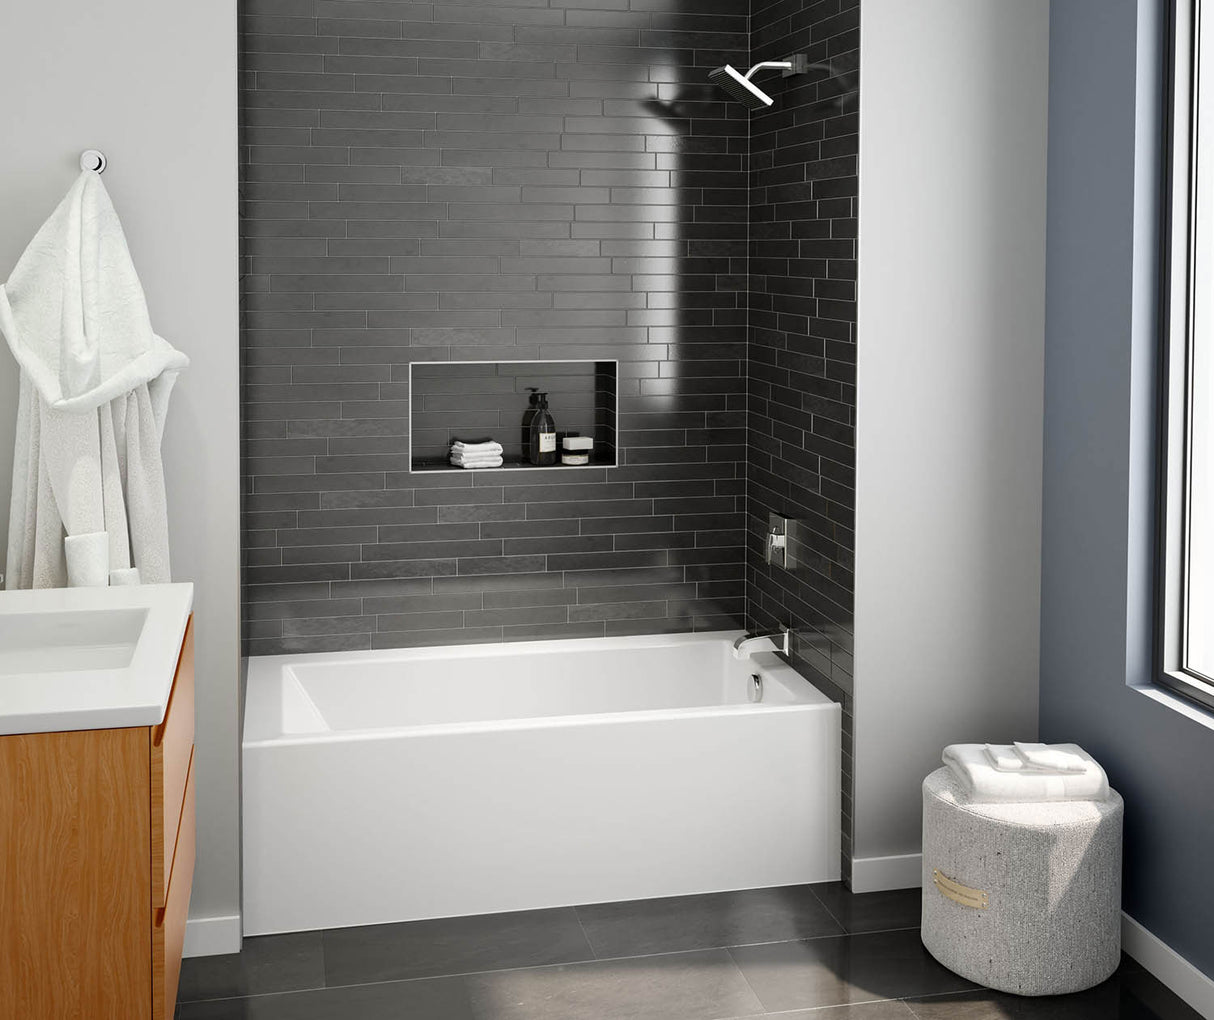 Swanstone VP6032CTMINL/R 60 x 32 Solid Surface Bathtub with Right Hand Drain in White VP6032CTMINR.010